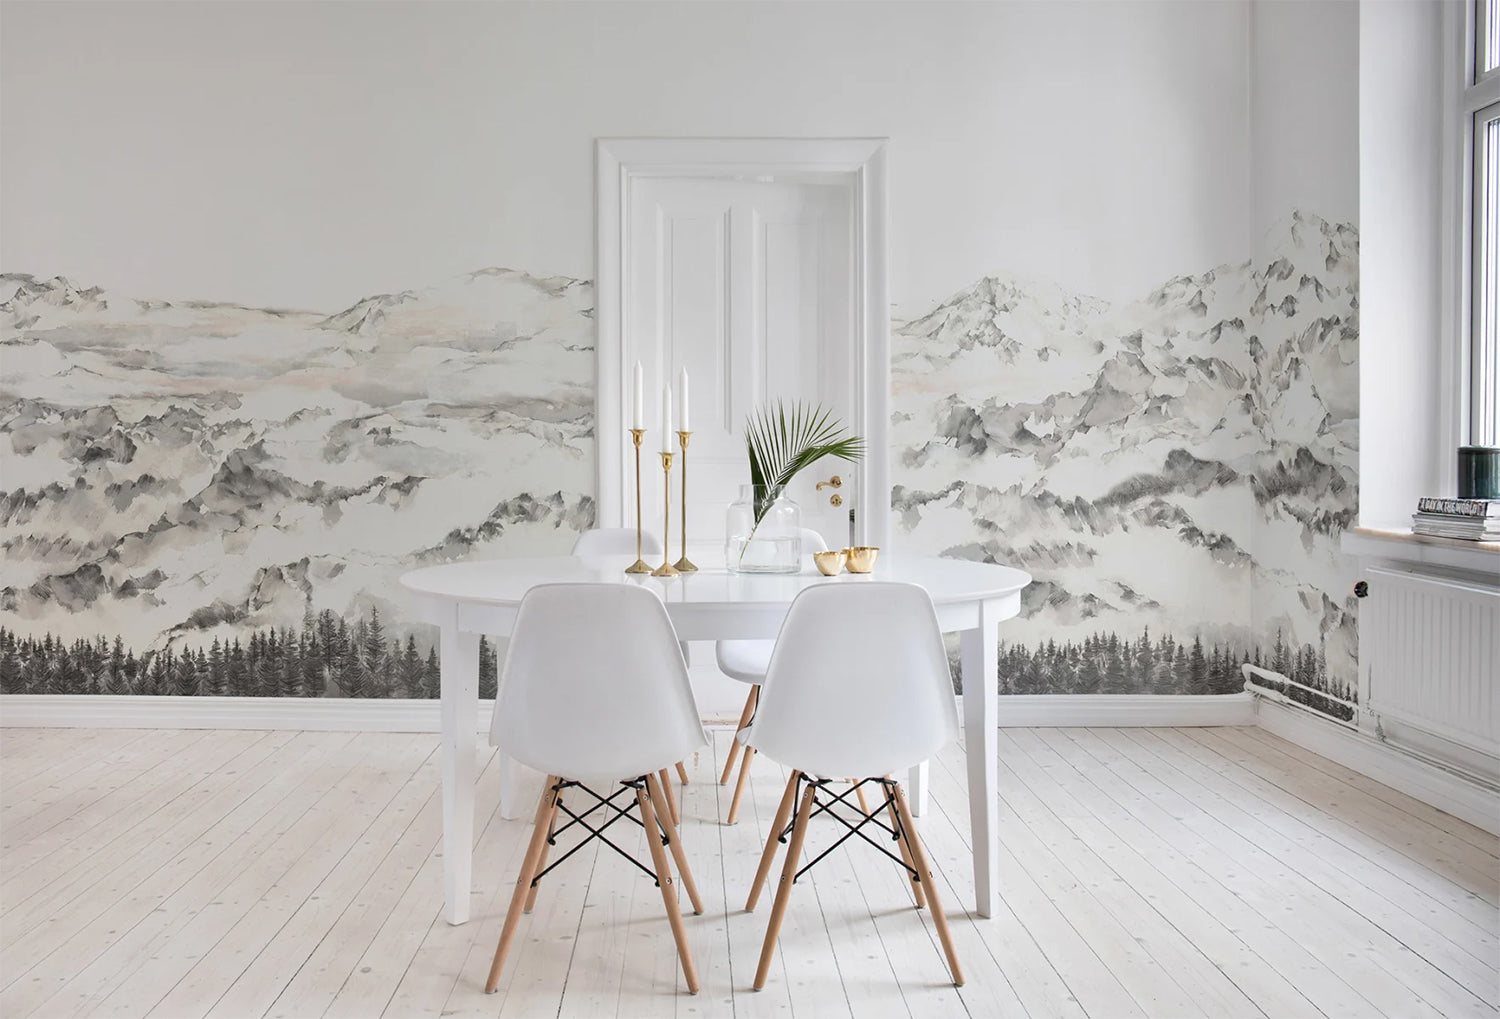 Carol Mountain Landscape Mural Wallpaper in a dining room.